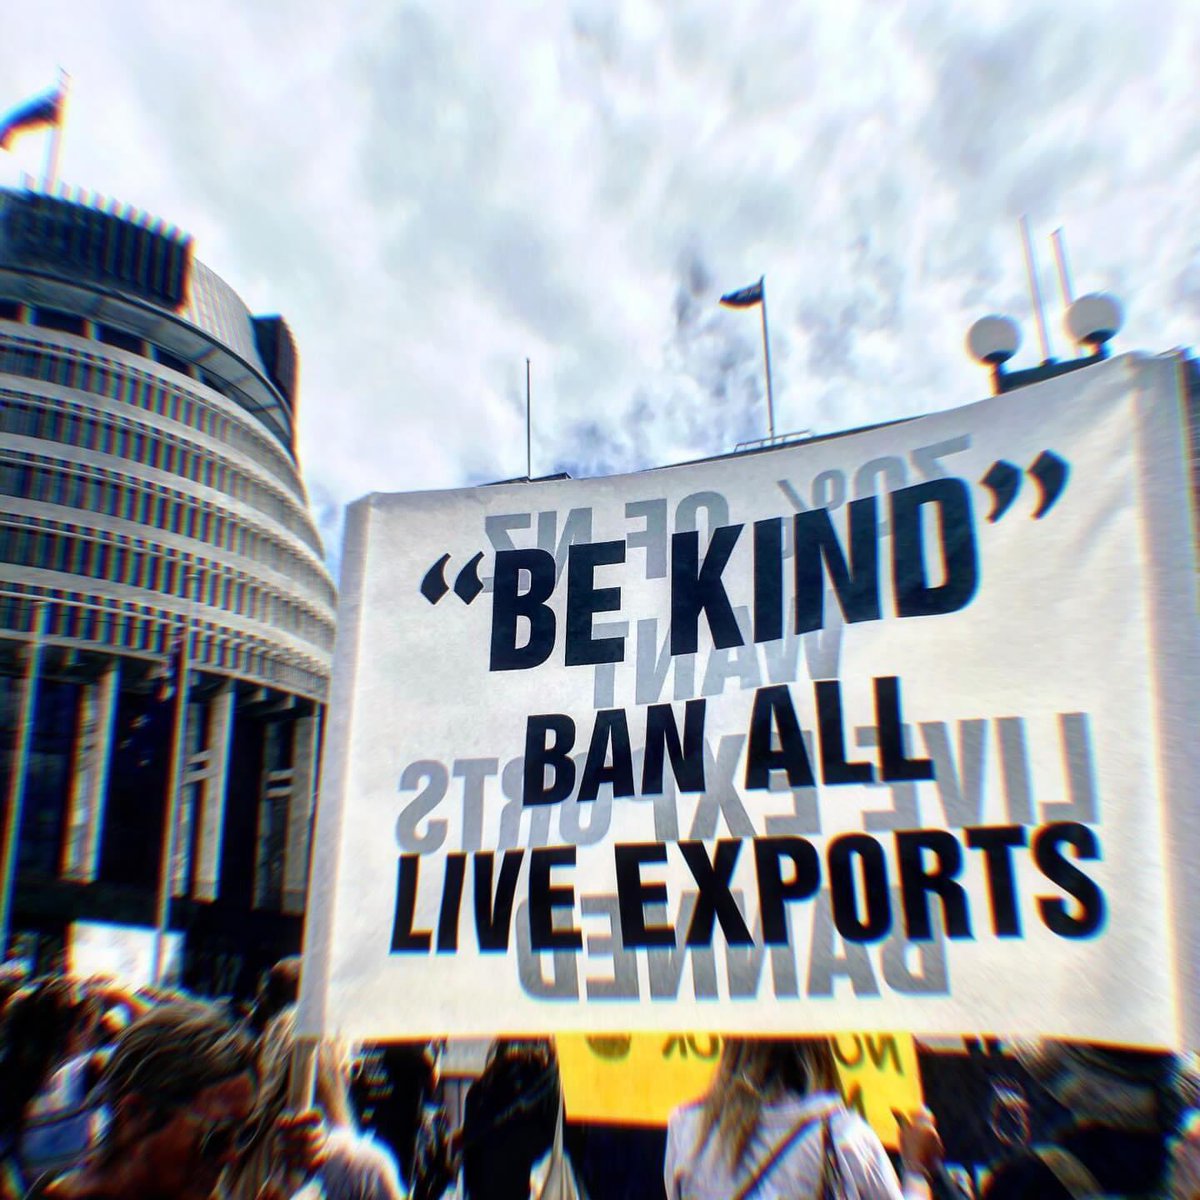 Live export will be remembered in history as one of humankind’s most shameful atrocities. NZ must never repeat this cruelty! #EndLiveExport #KeeptheBan ✊